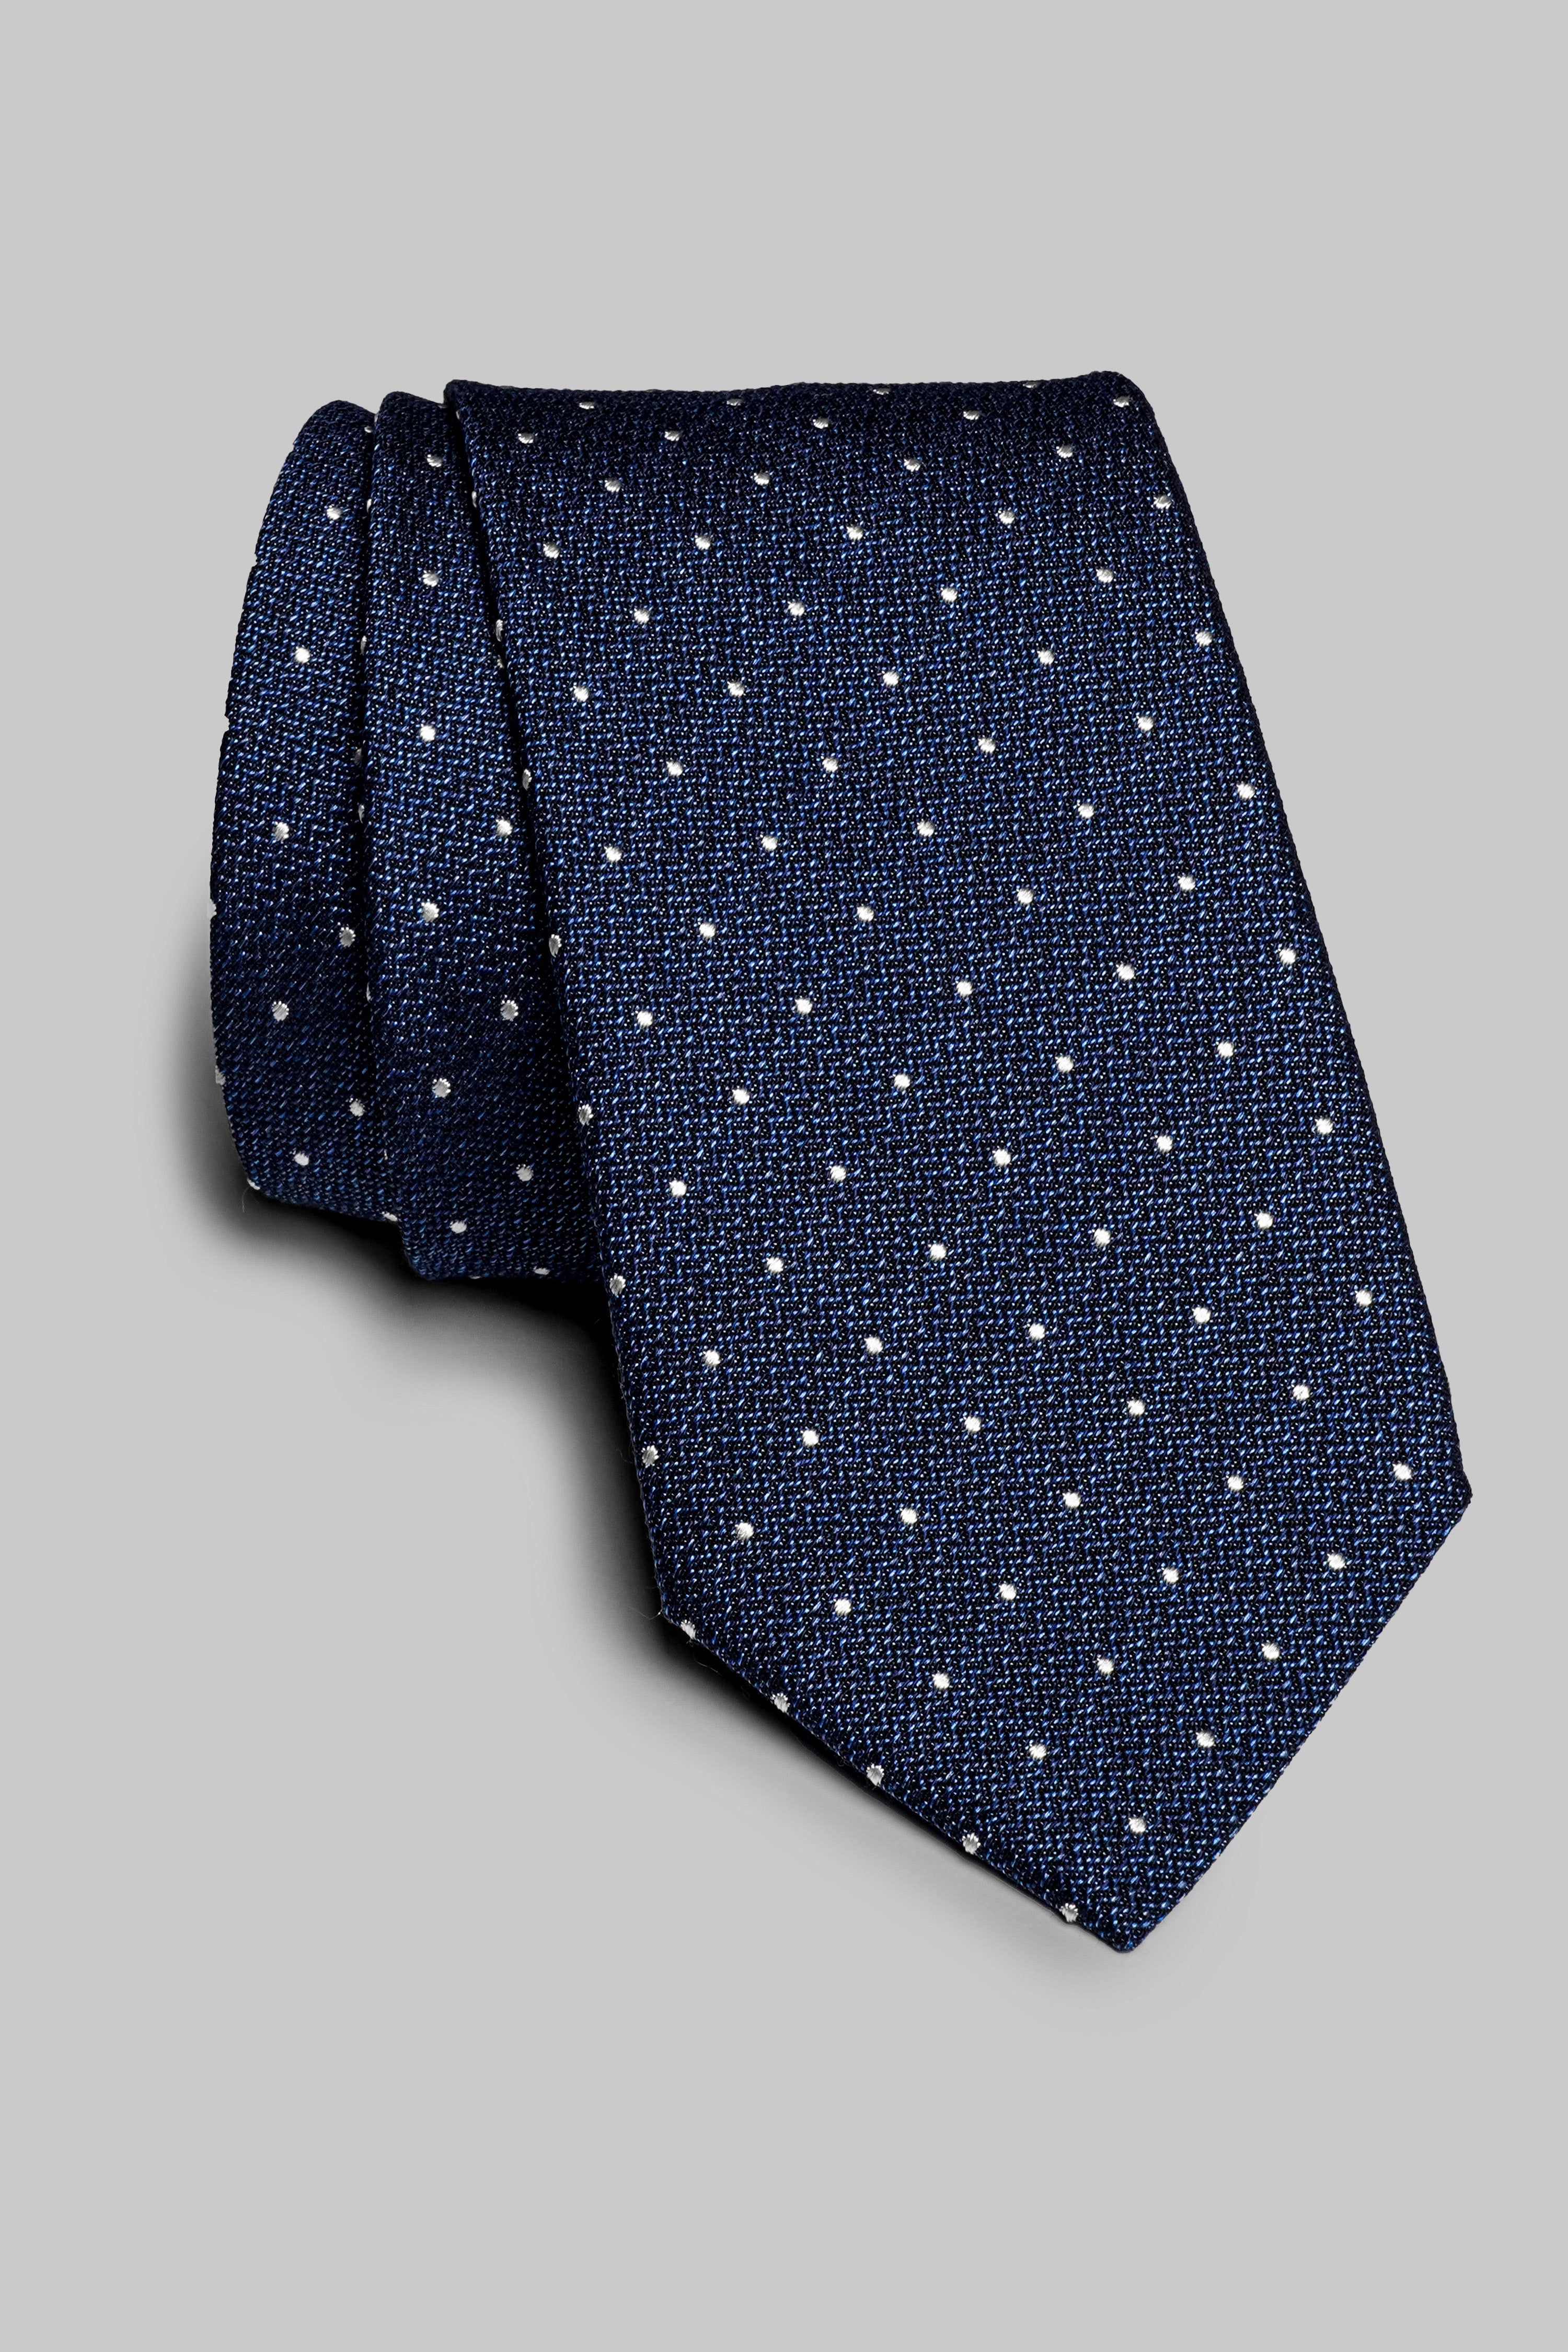 Alt view Pindot Woven Tie in Palace Blue